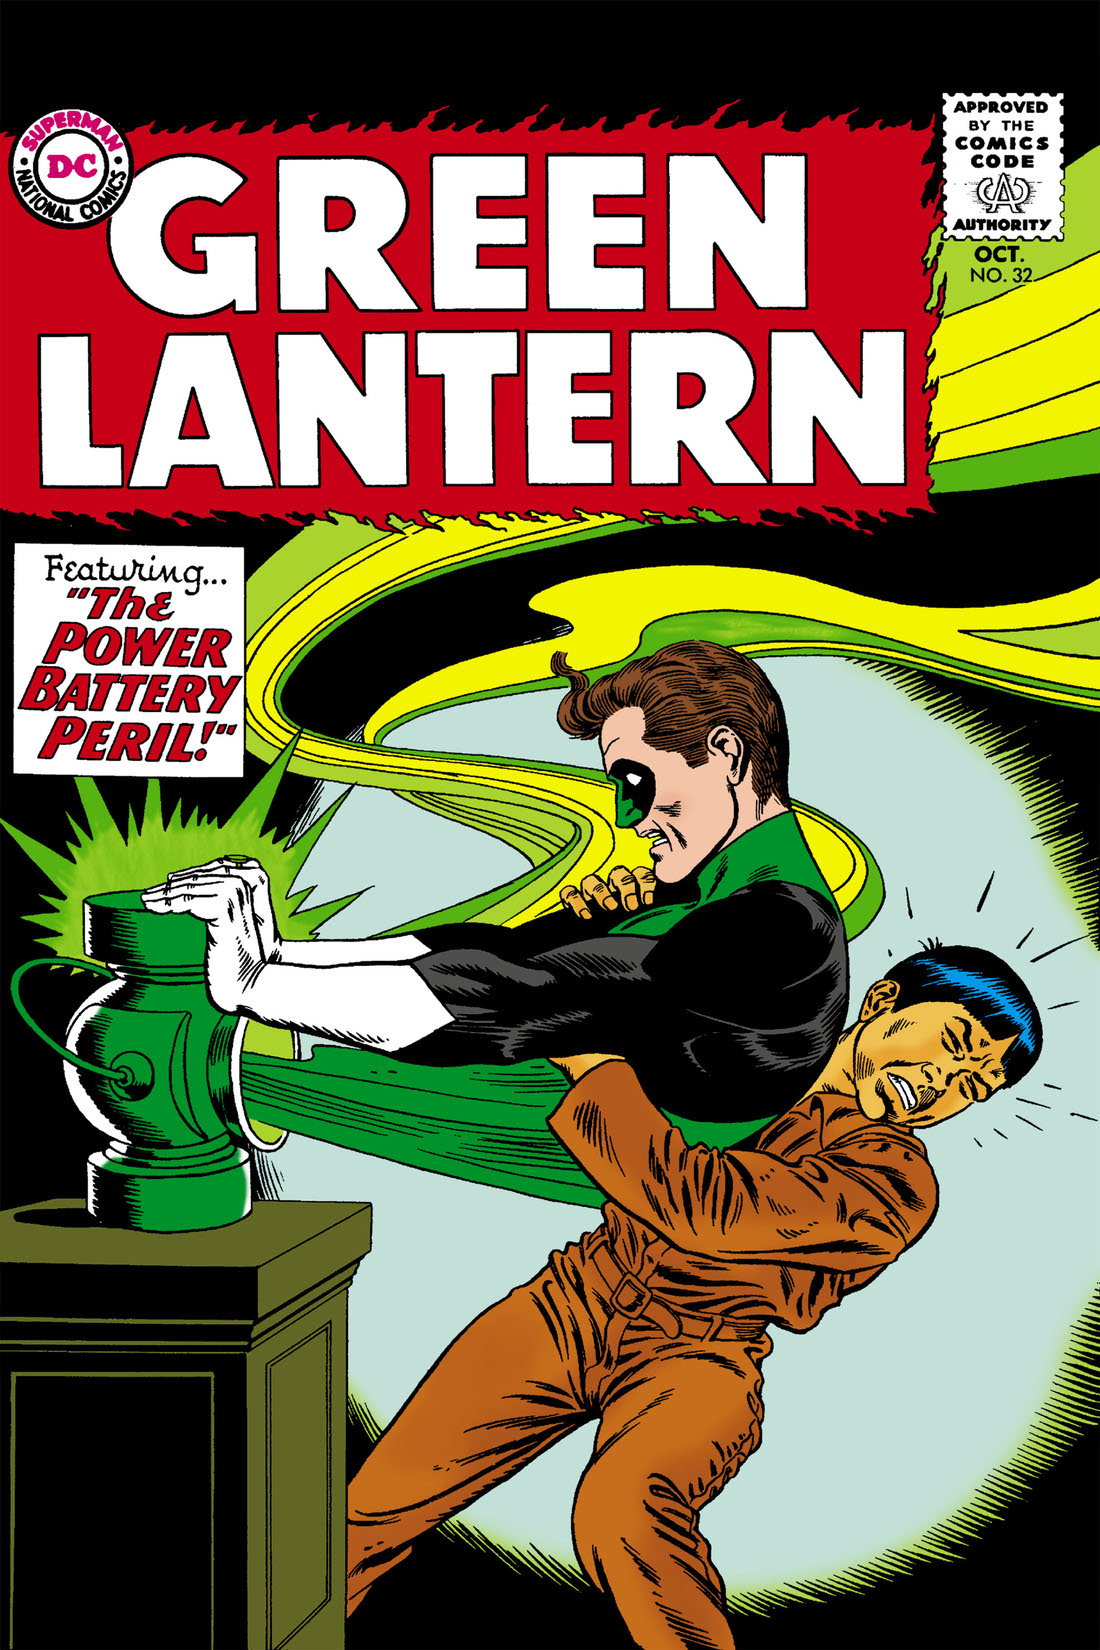 Green Lantern (1960-) #32 preview images